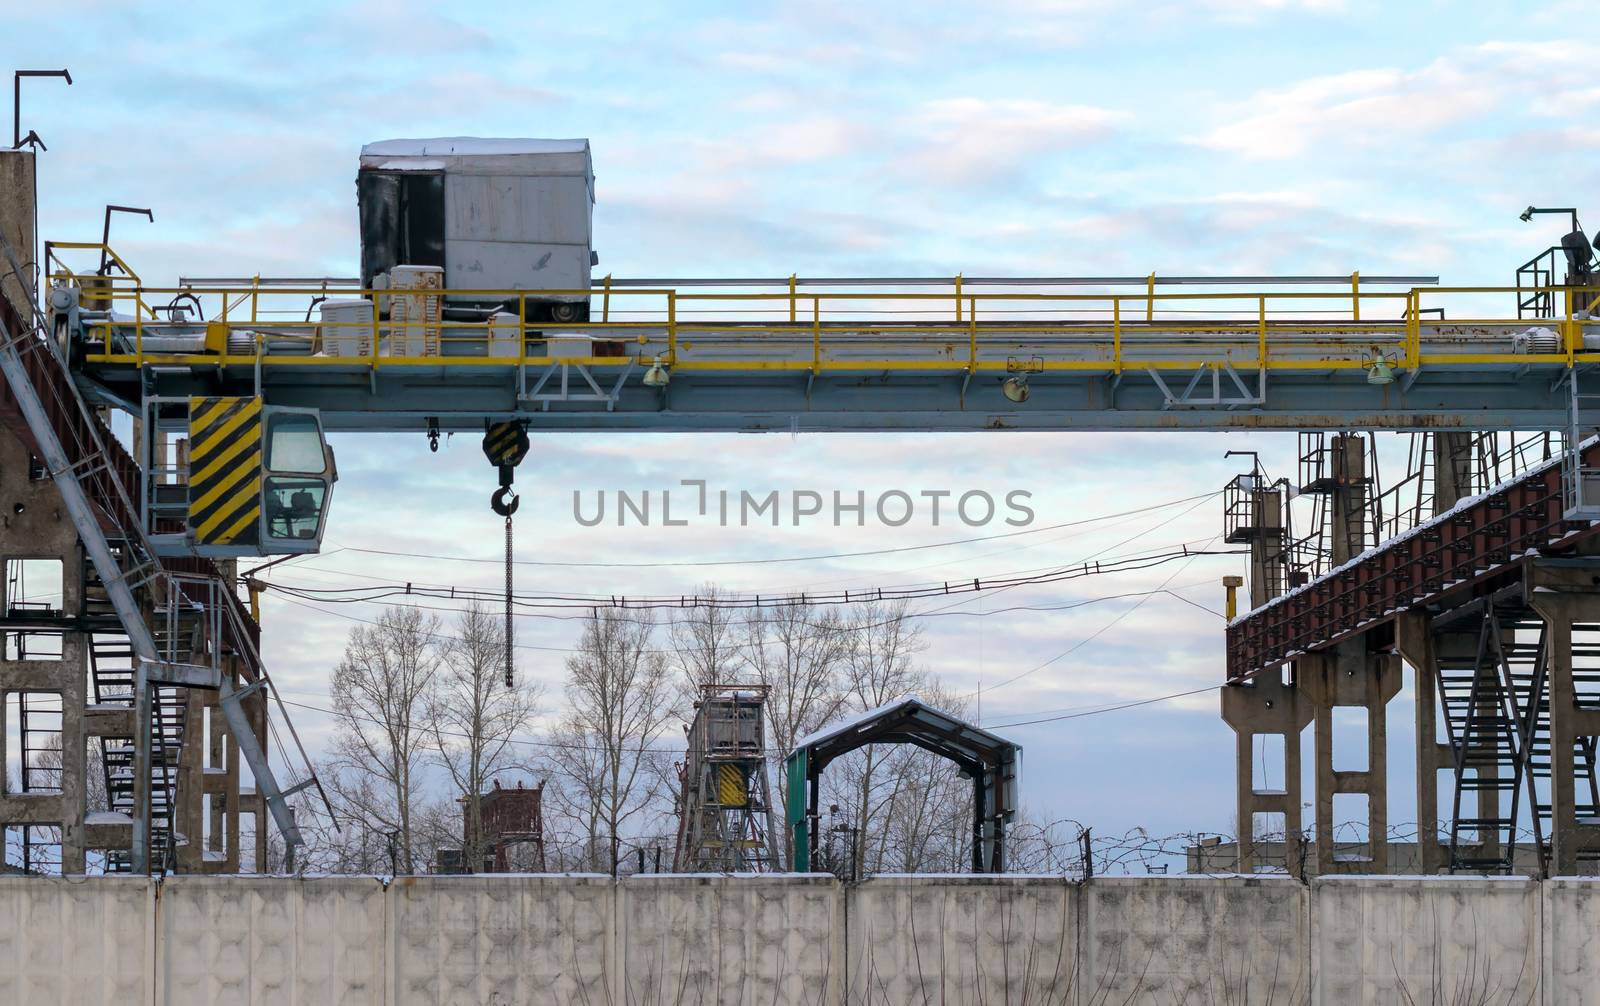 stationary crane in the protected area of the plant behind a concrete fence fence